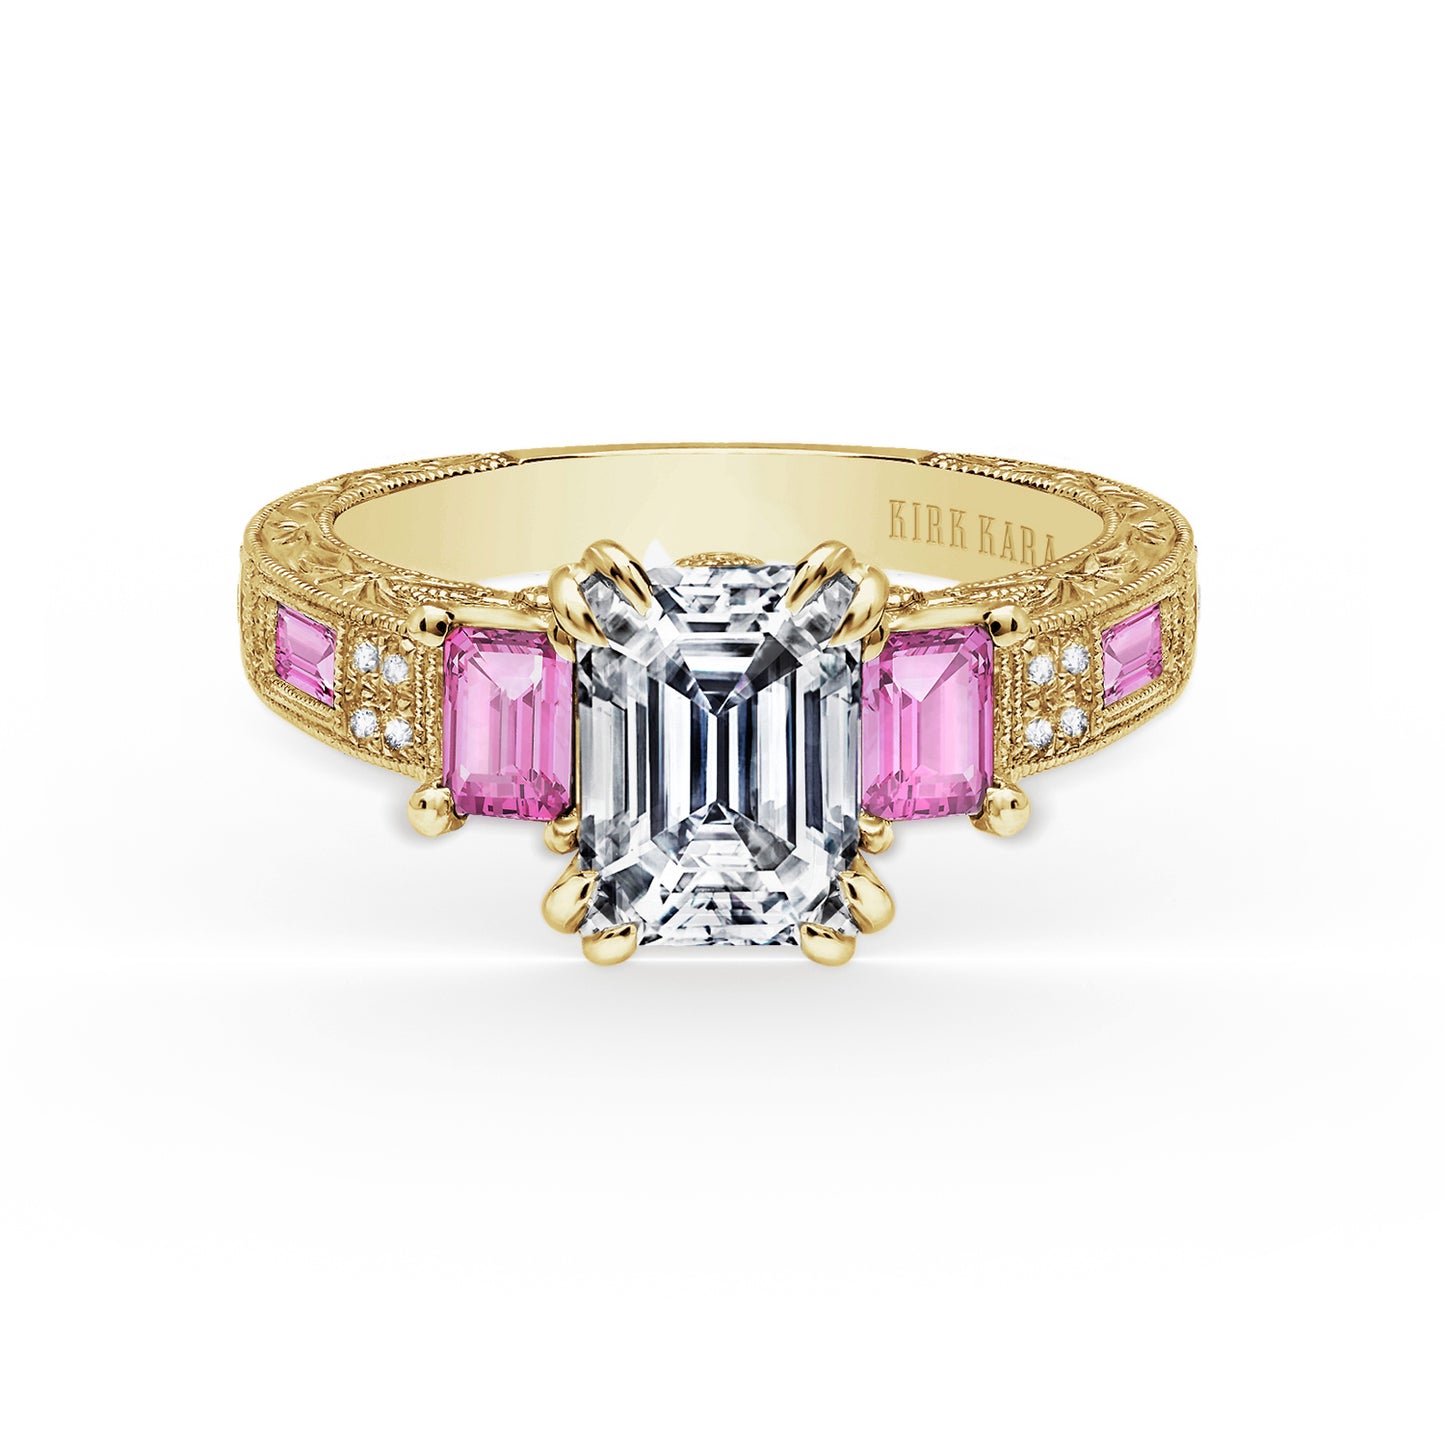 Deco Three Stone Engraved Pink Sapphire Baguette Diamond Engagement Ring